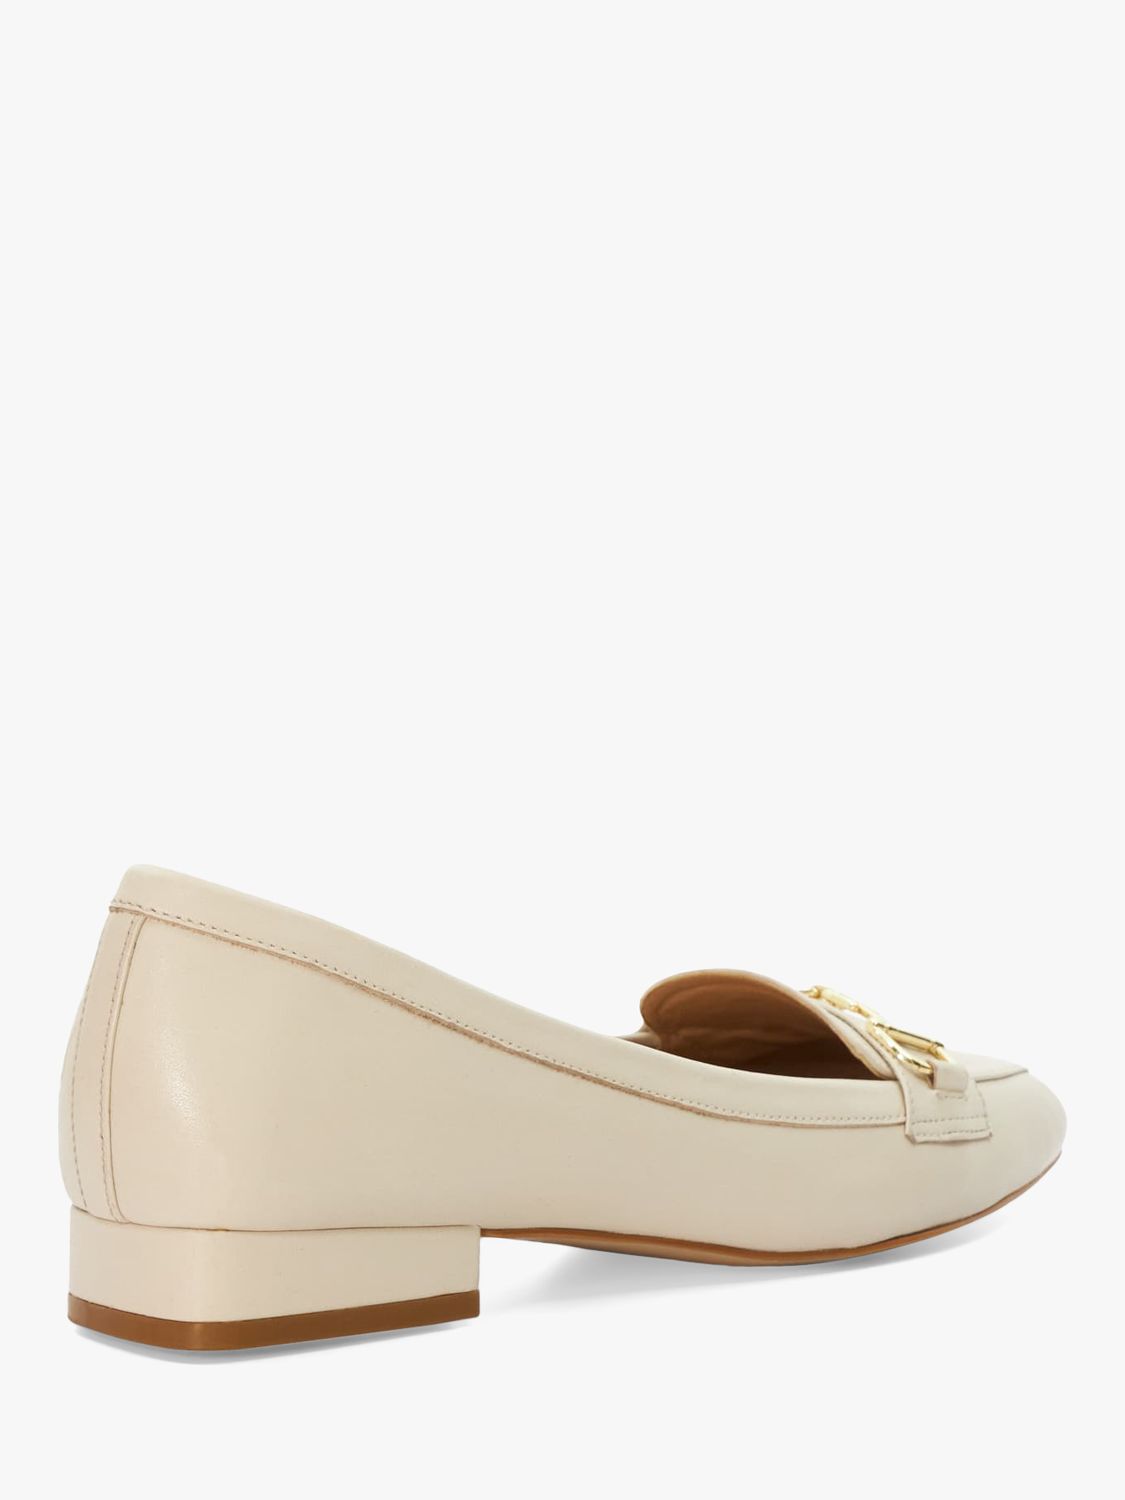 Buy Dune Graice Snaffle Trim Leather Loafers Online at johnlewis.com